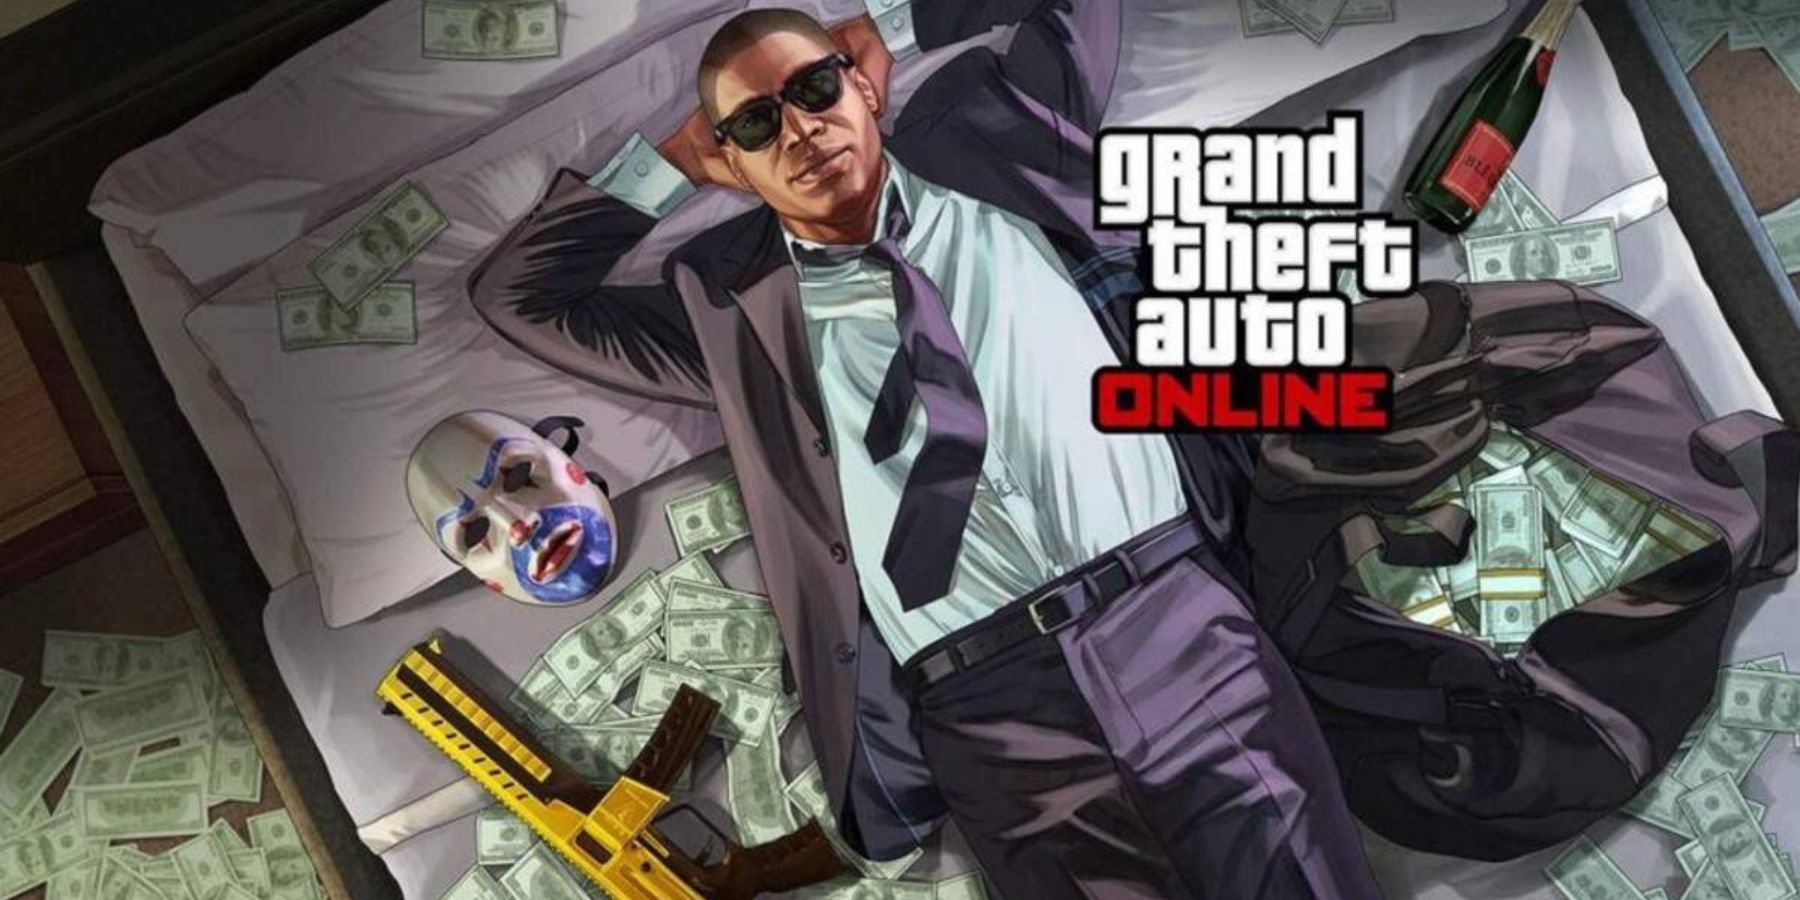 Mexican Drug Cartels Reportedly Using GTA Online to Recruit New Members